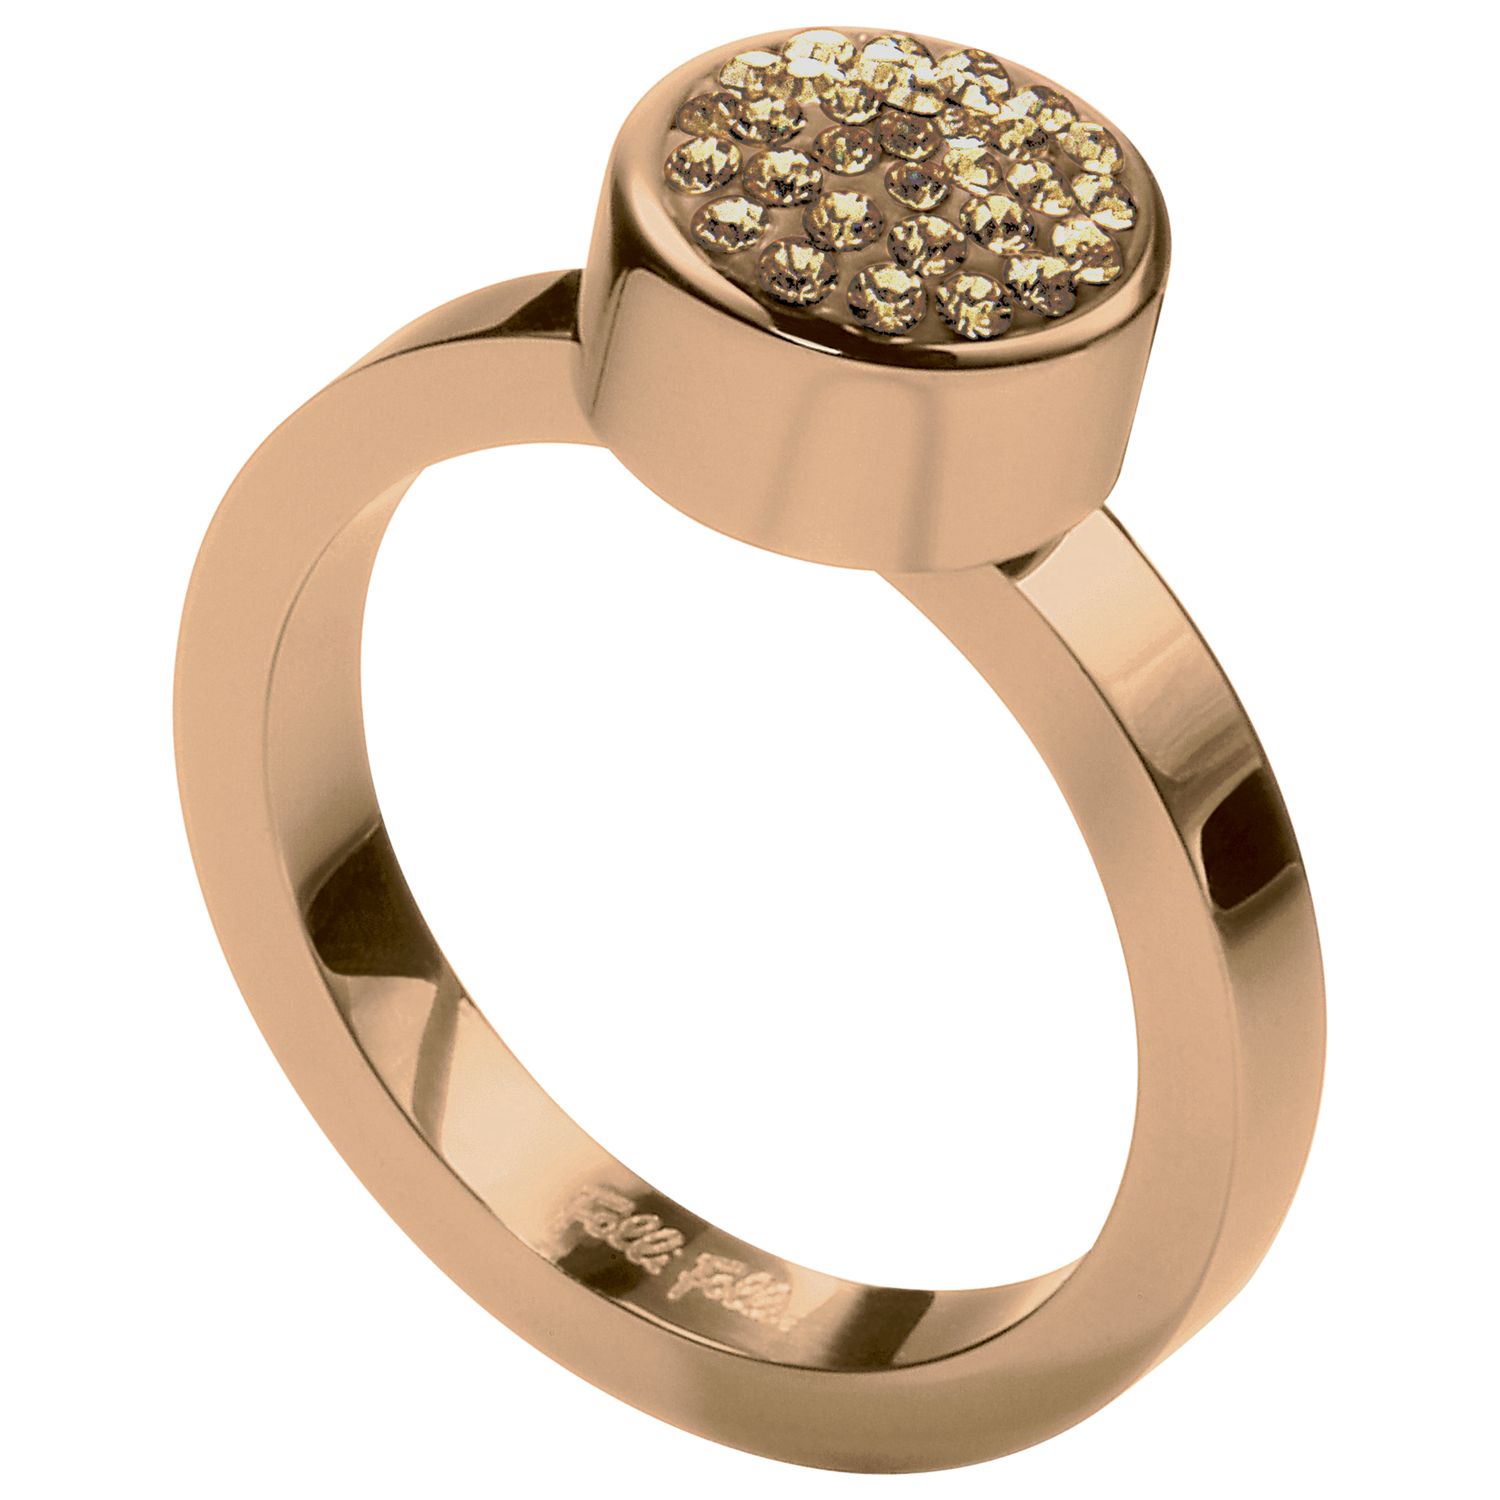 Folli Follie Chic Crystal Cup Ring, Rose gold